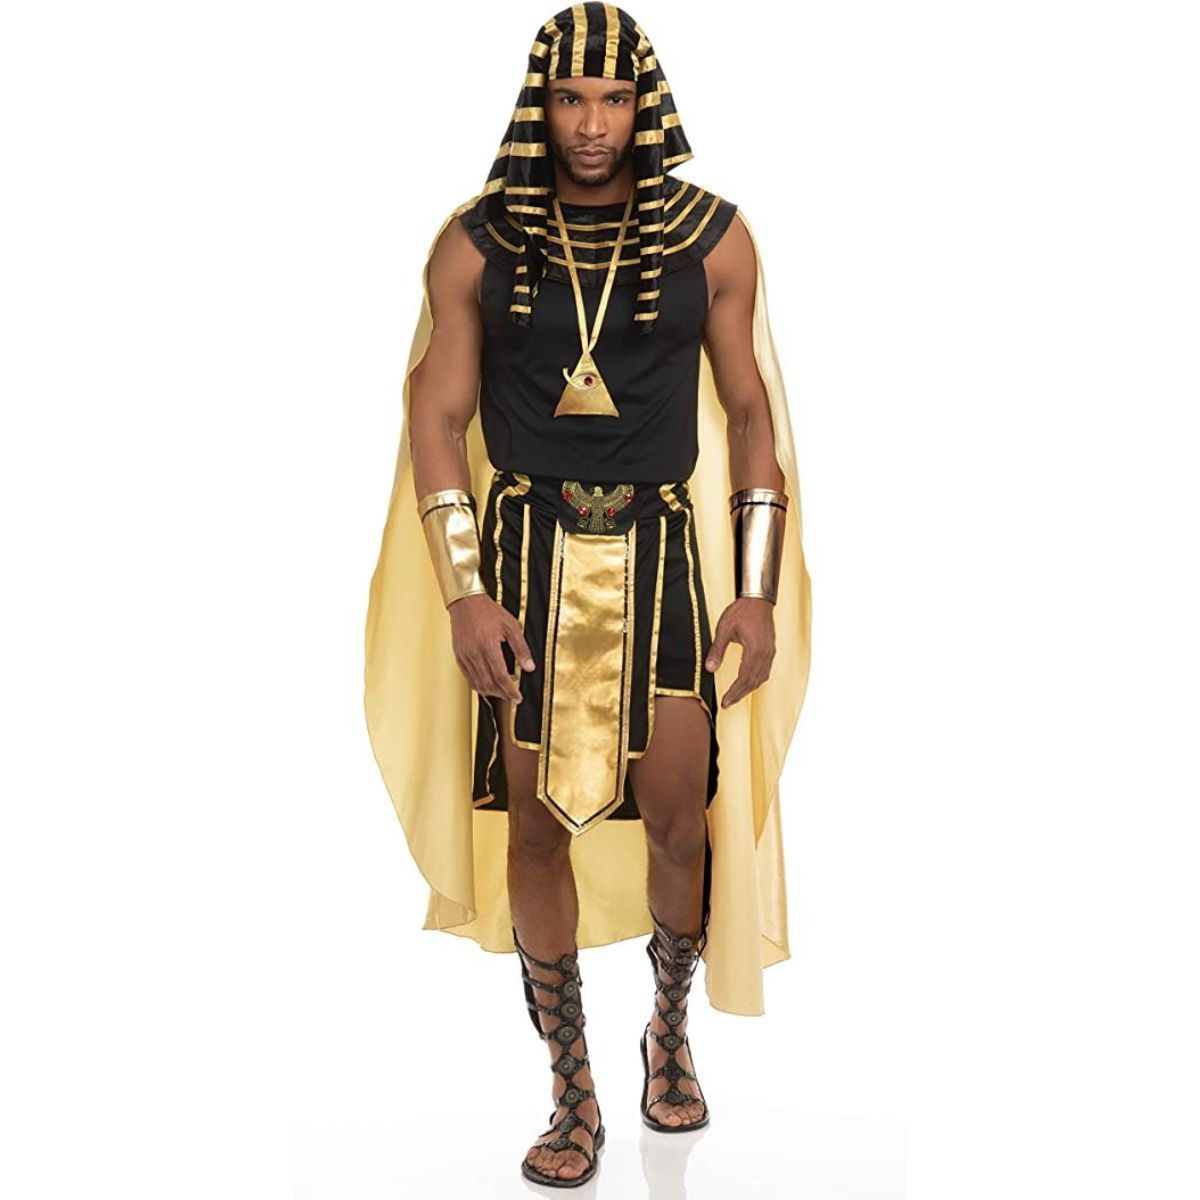 King of Egypt Adult Costume